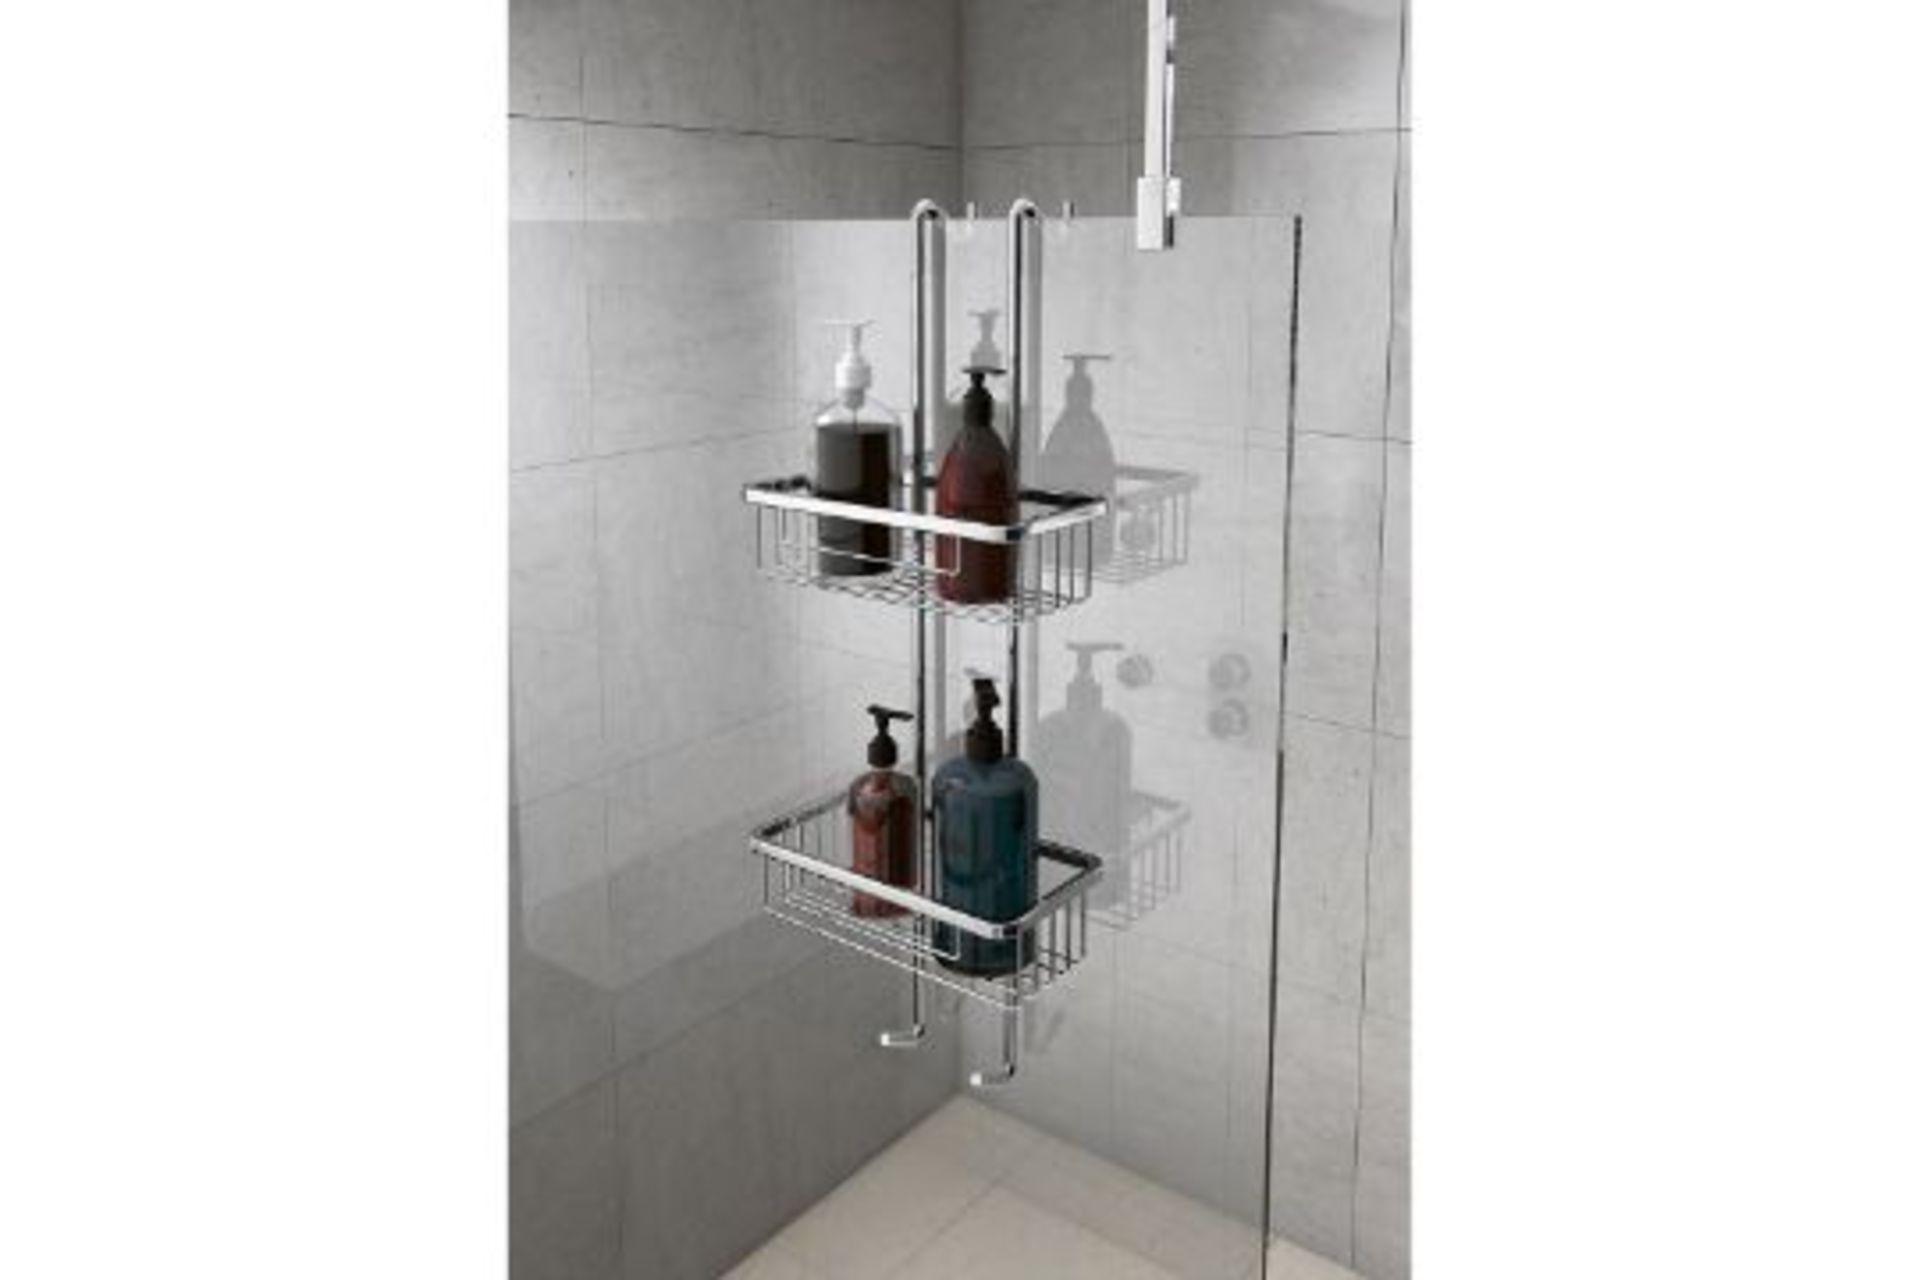 BRAND NEW CHROME DOUBLE WIRE RECTANGULAR SHOWER TIDY RRP £249